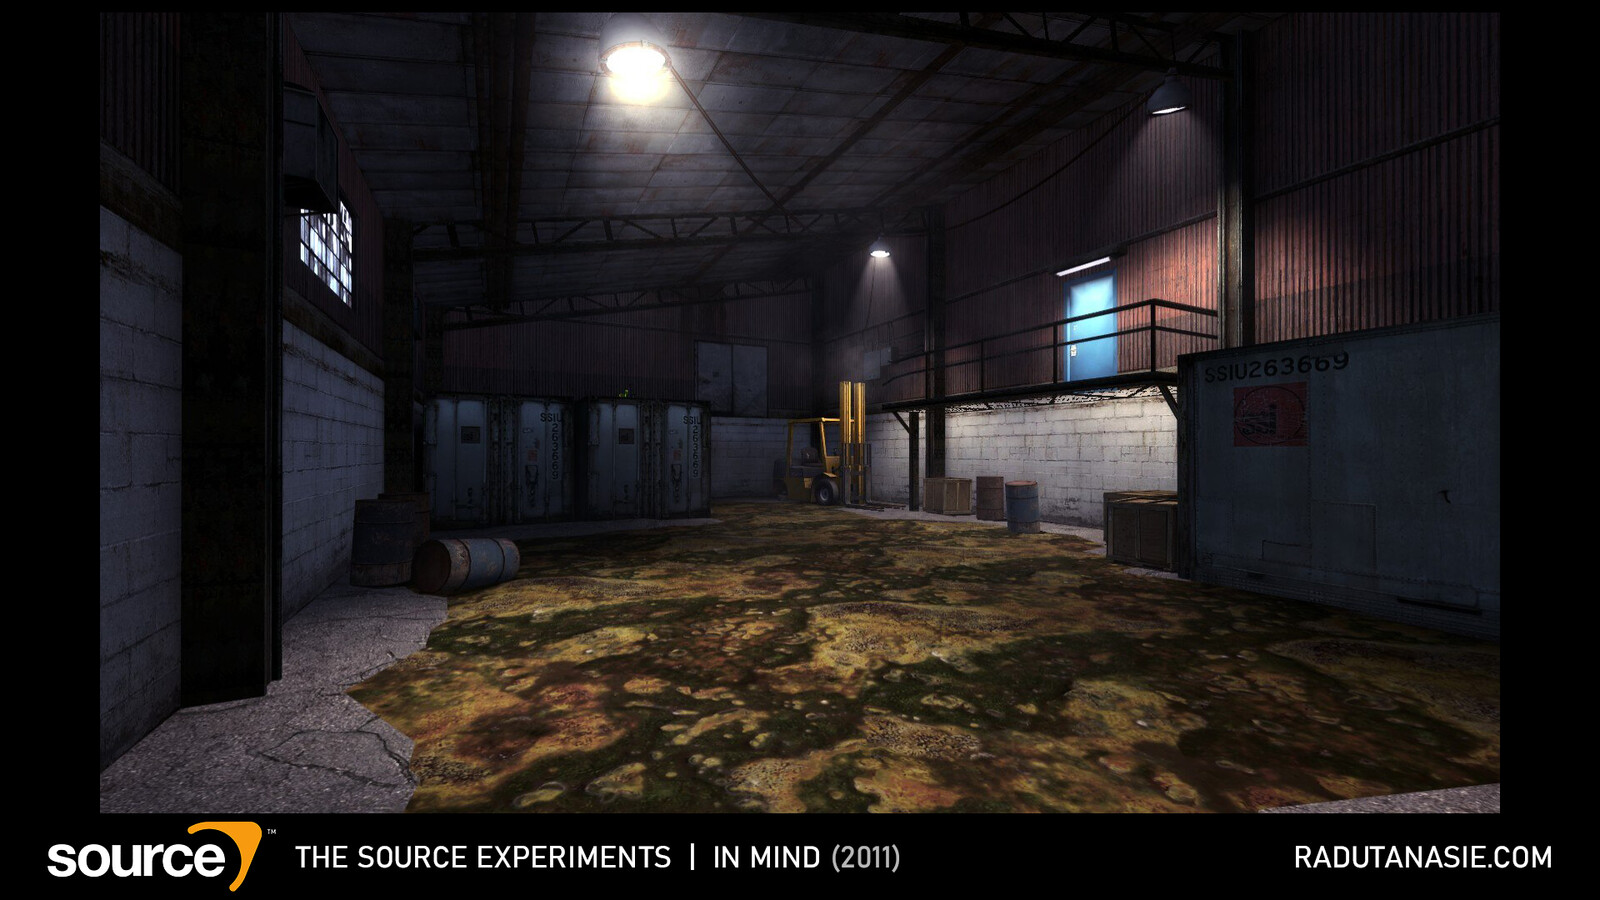 Classic Half-Life toxic sludge in a warehouse where you need to activate the forklift to progress.